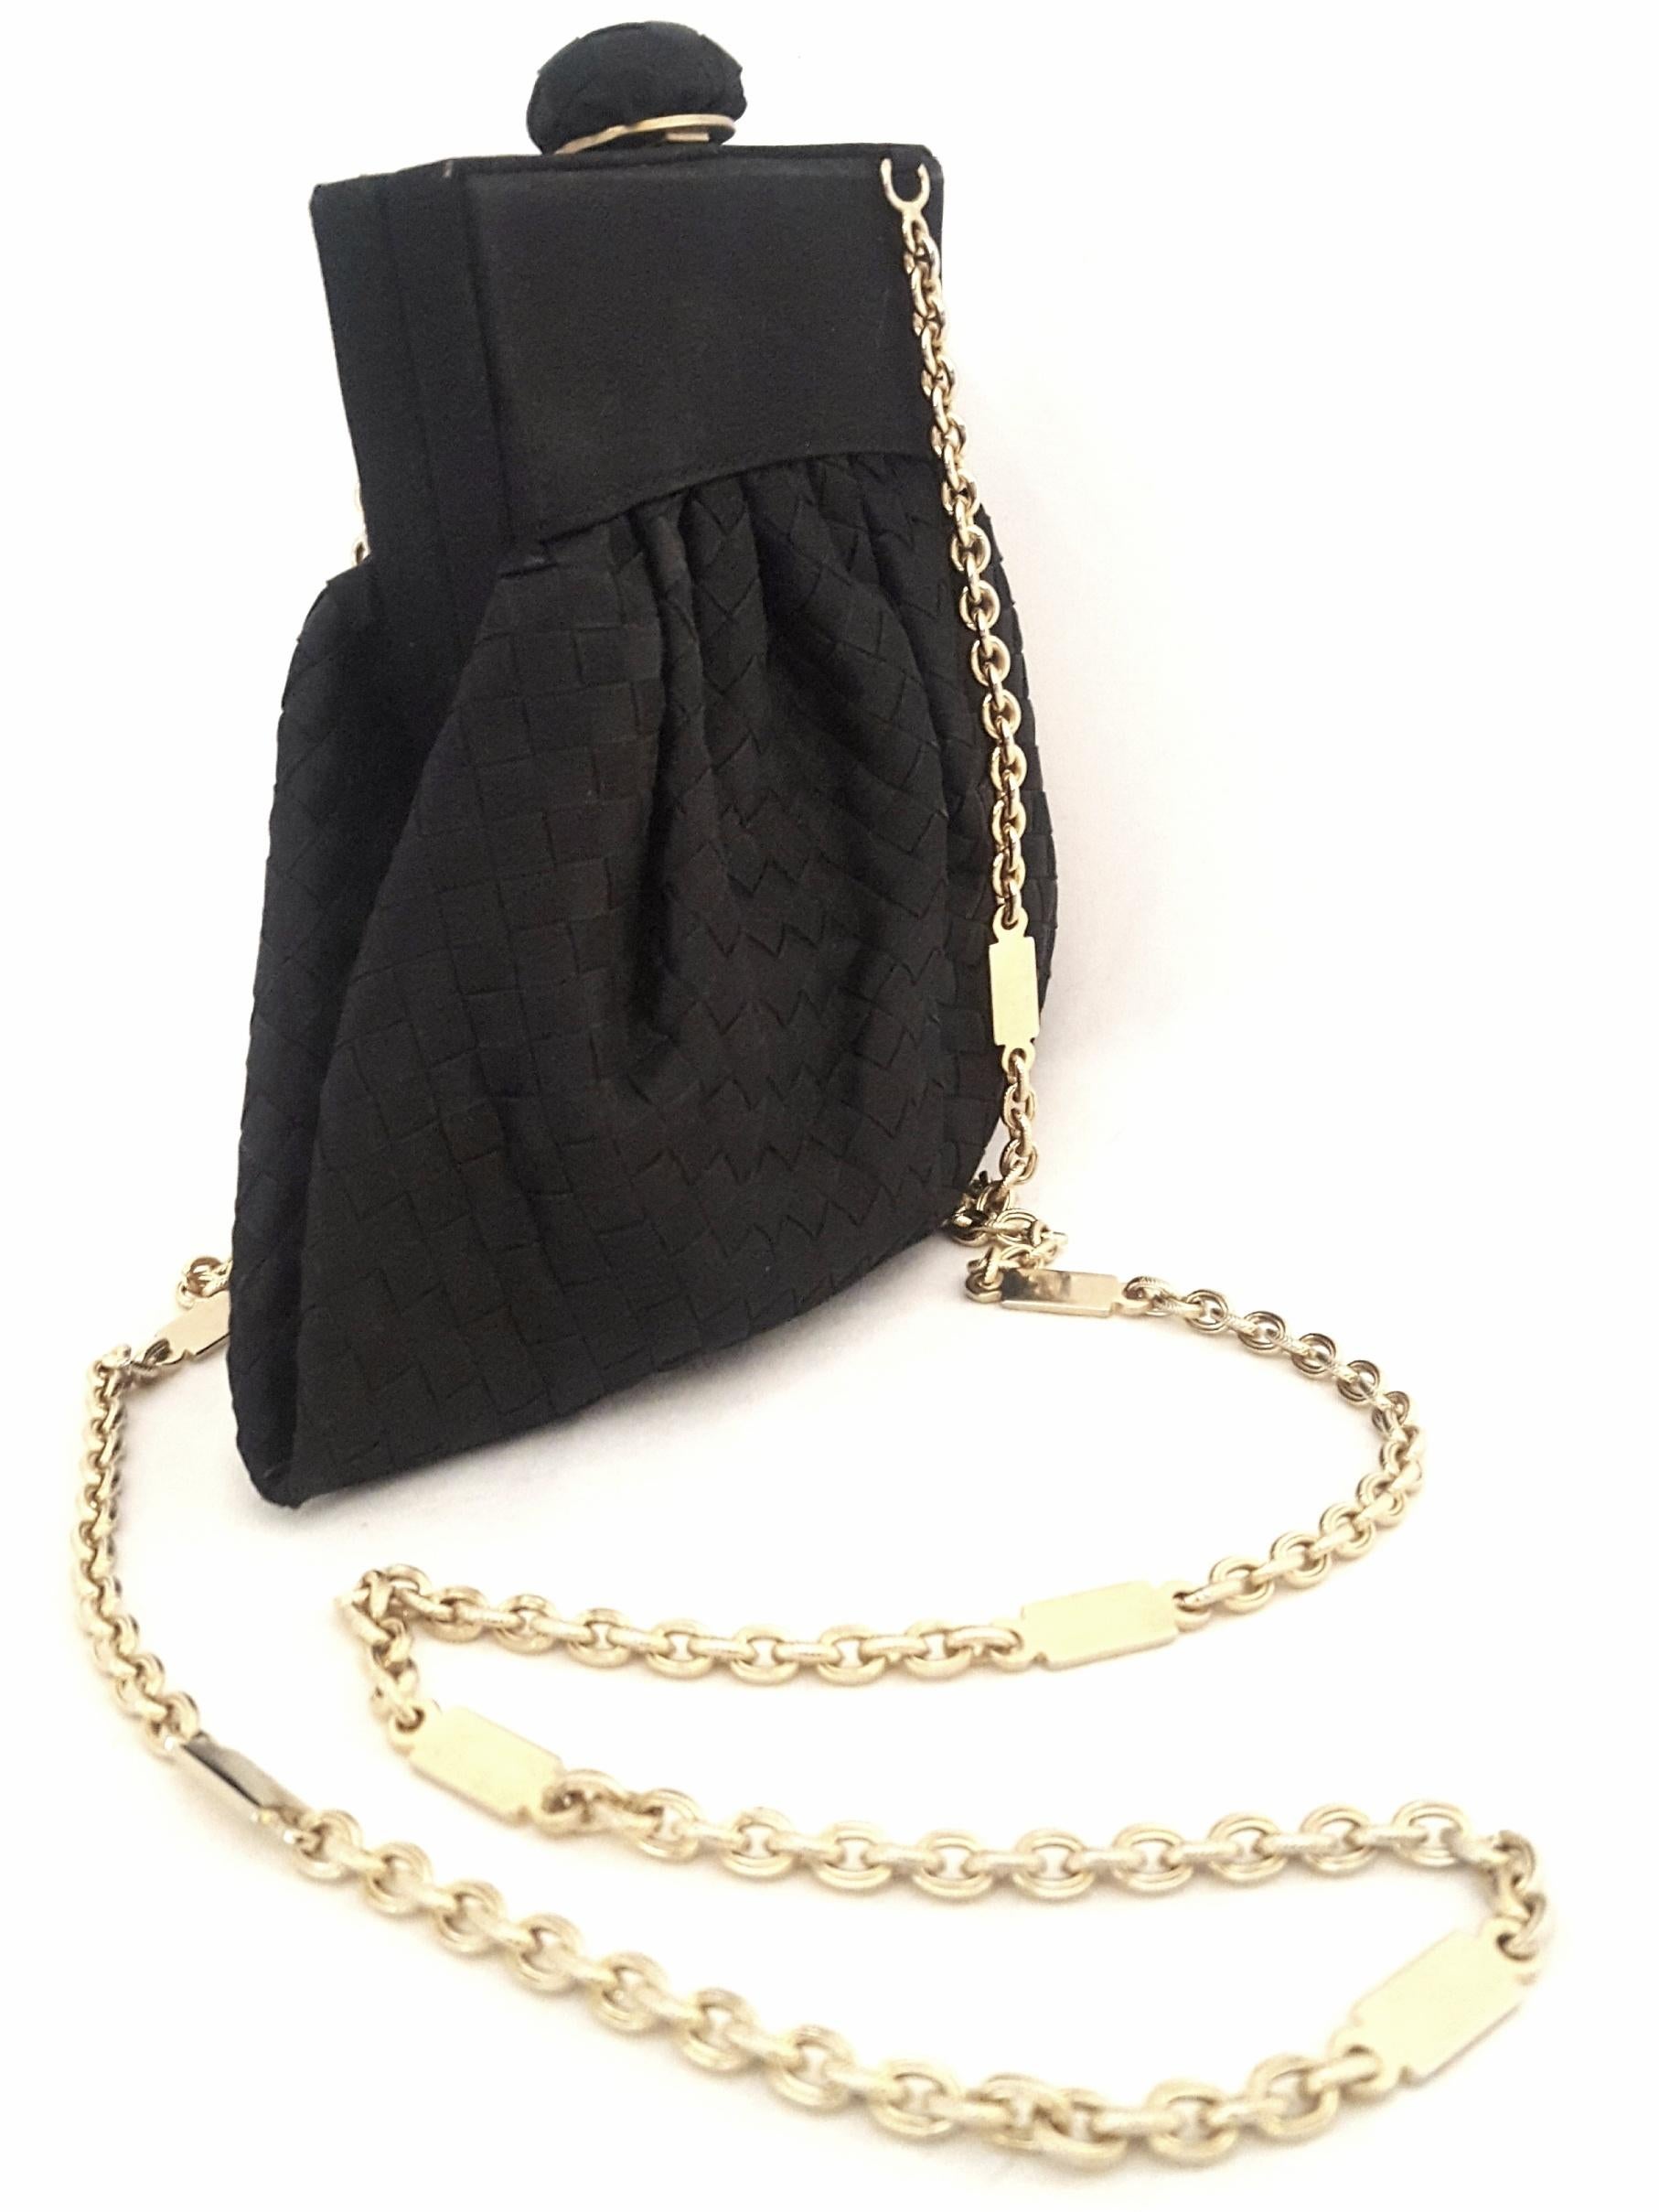 Bottega Veneta vintage black satin intrecciato (woven) mini bag contains an elaborate gold tone shoulder strap. 
With the signature intrecciato woven pattern adorning the distinct shape of this small structured bag it features a satin and gold tone